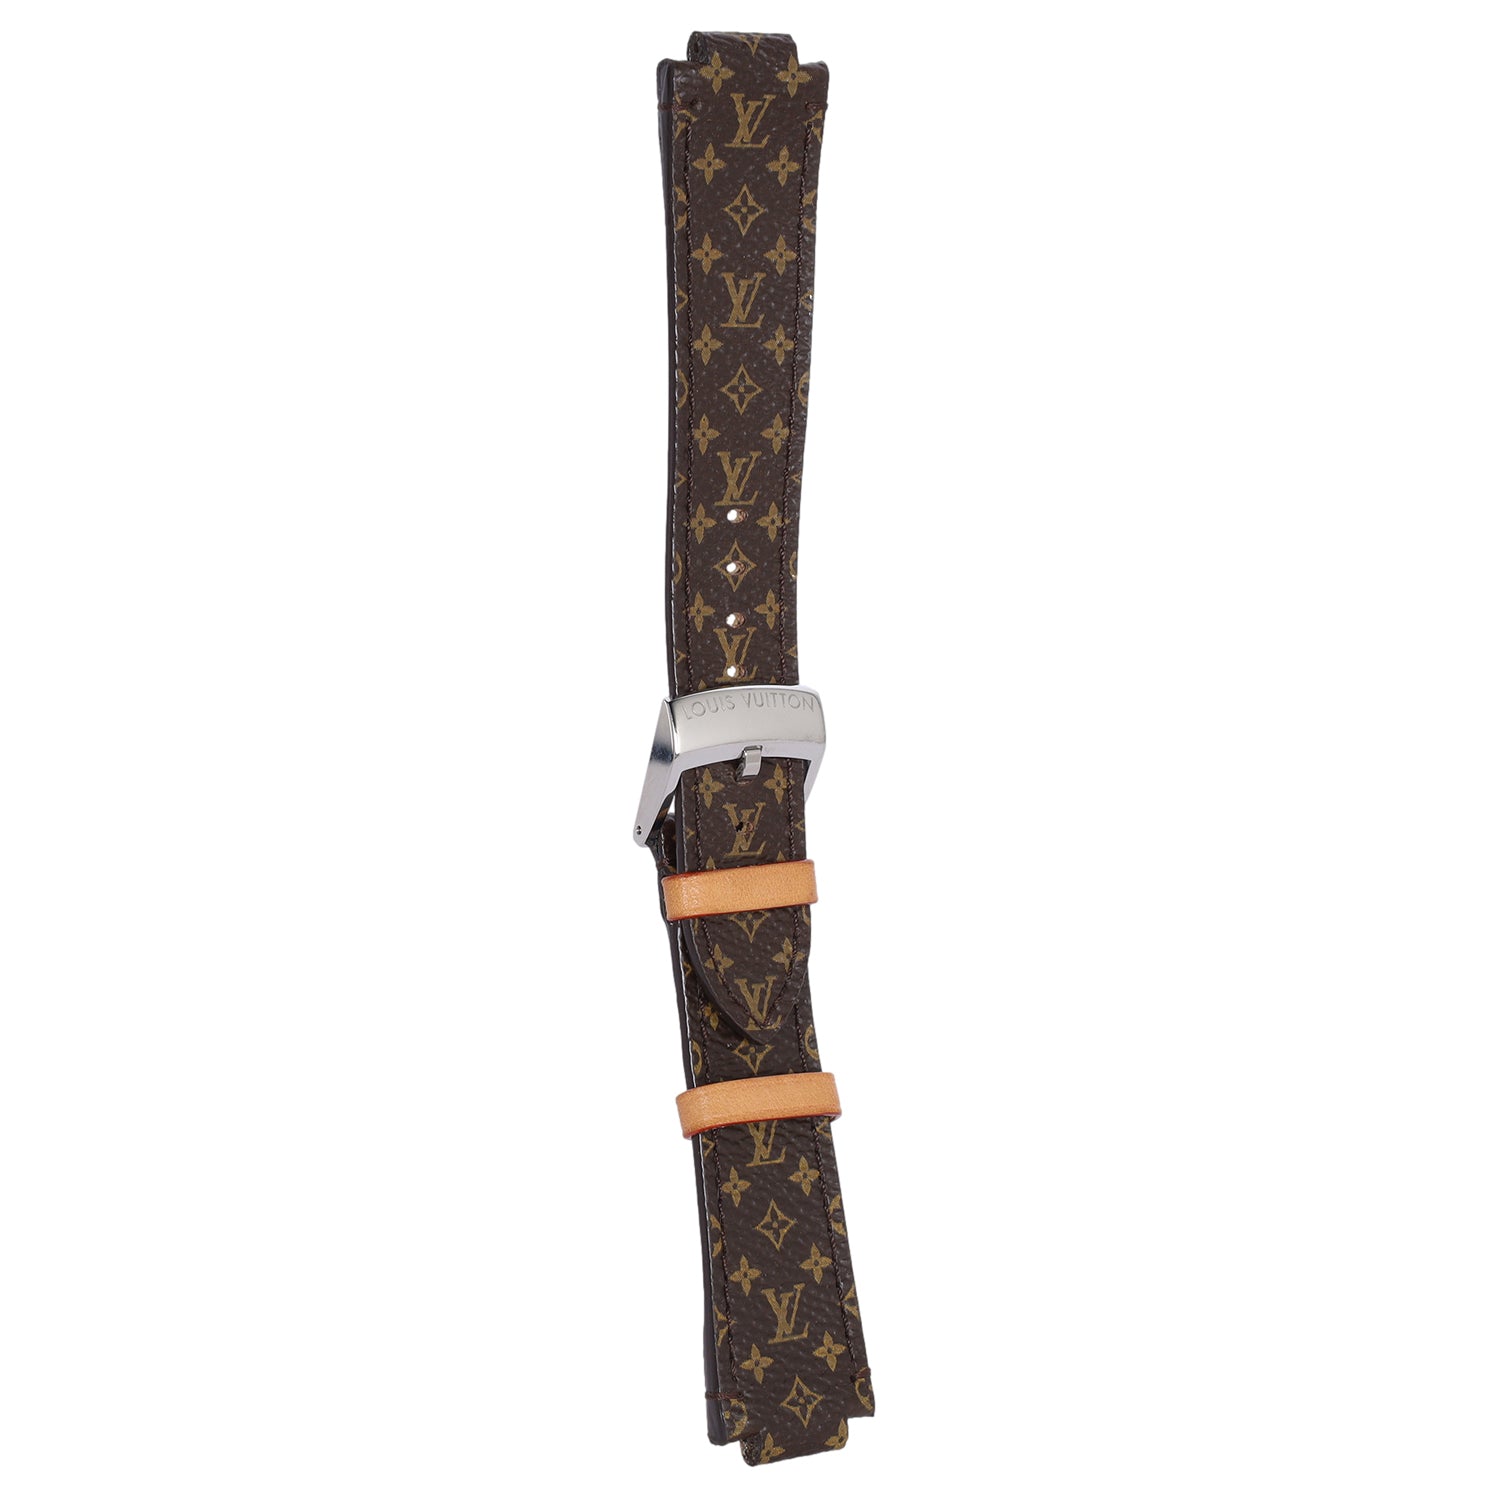 Converted an LV Tambour watch band into an Apple Watch Band